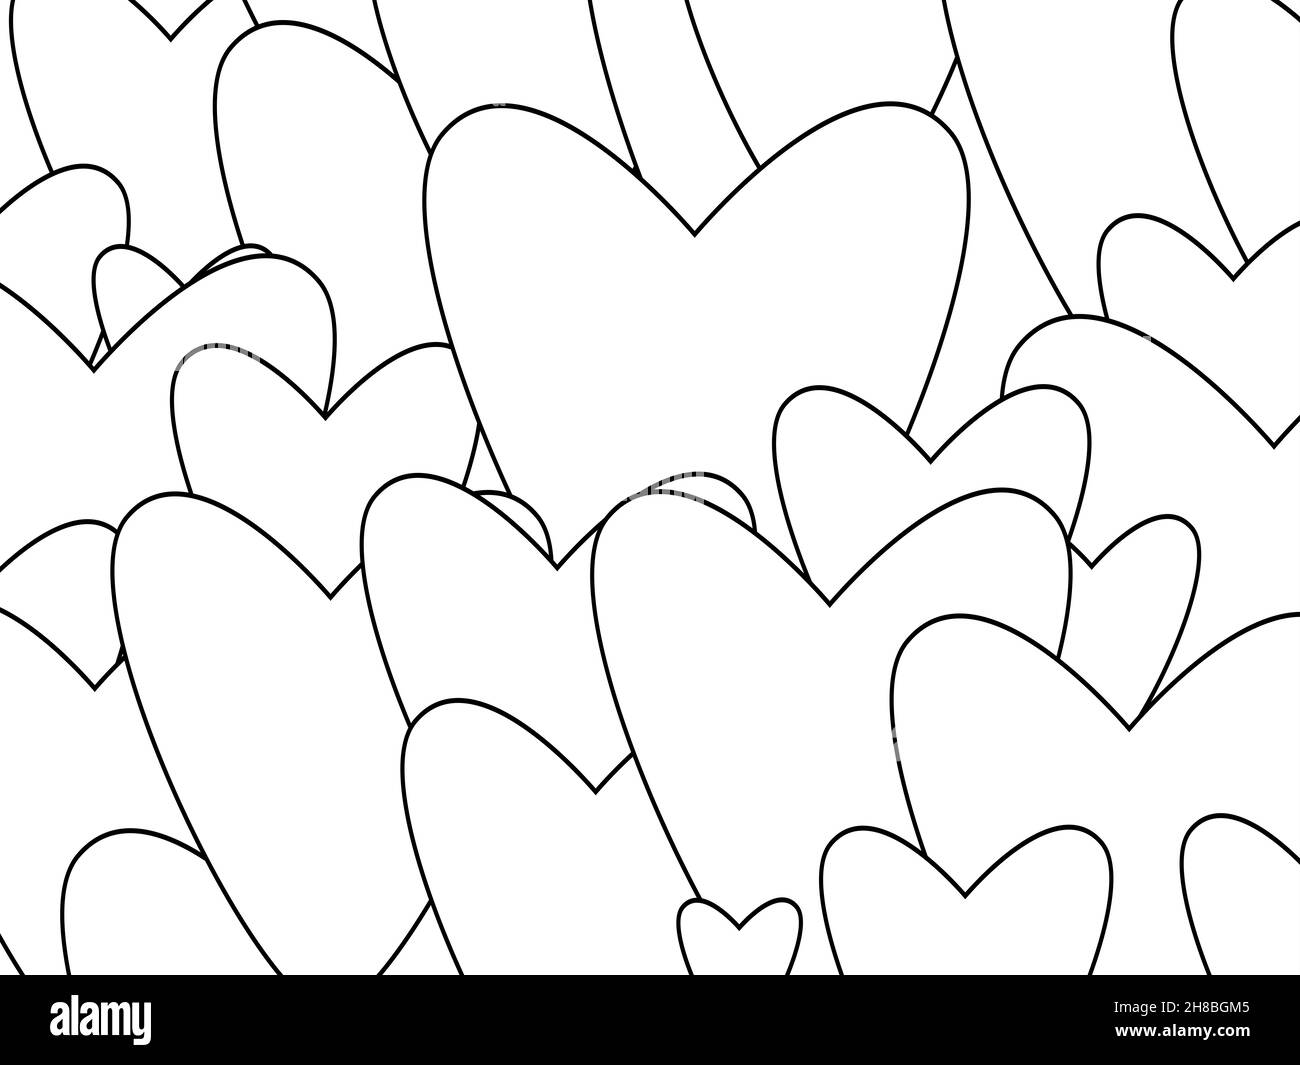 A background of overlapping white with blackline hearts Stock Photo